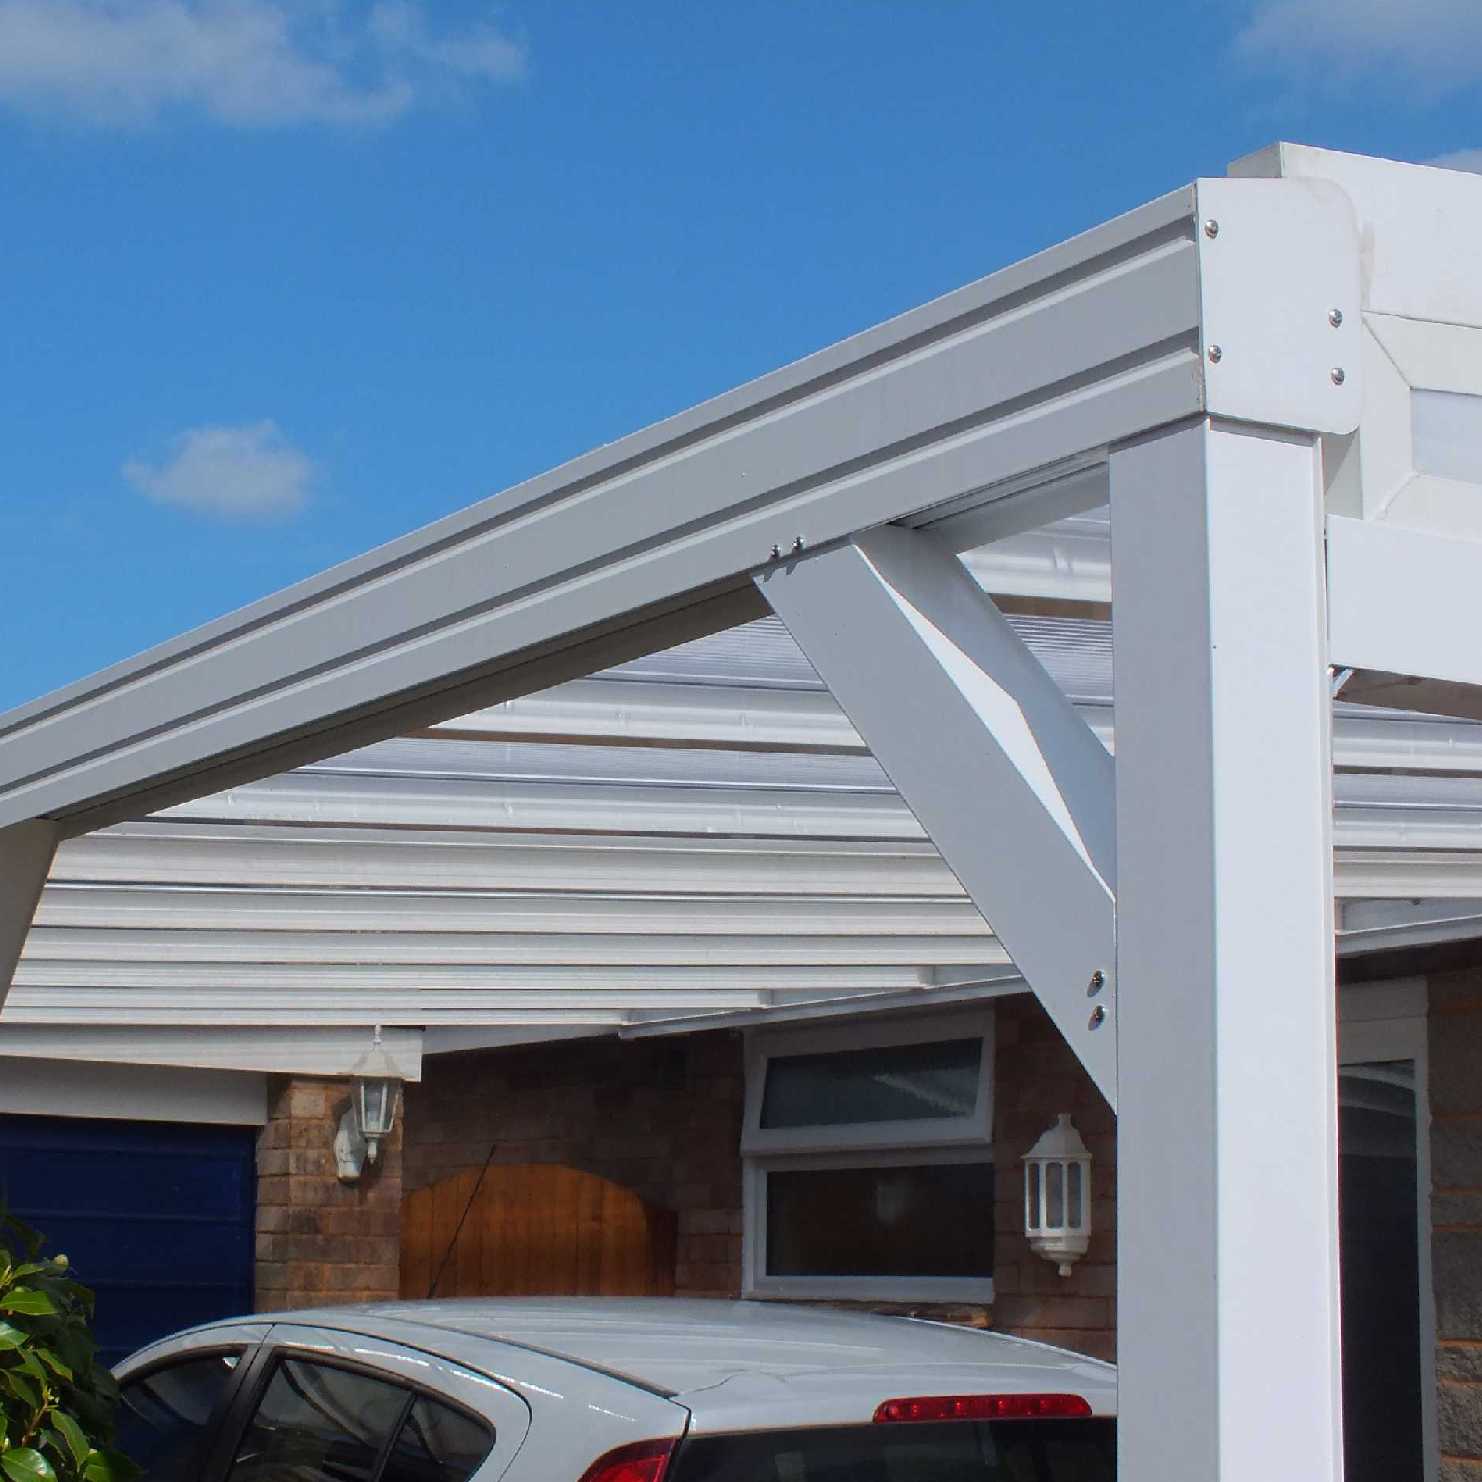 Buy Omega Smart Lean-To Canopy, White with 16mm Polycarbonate Glazing - 8.4m (W) x 2.0m (P), (4) Supporting Posts online today